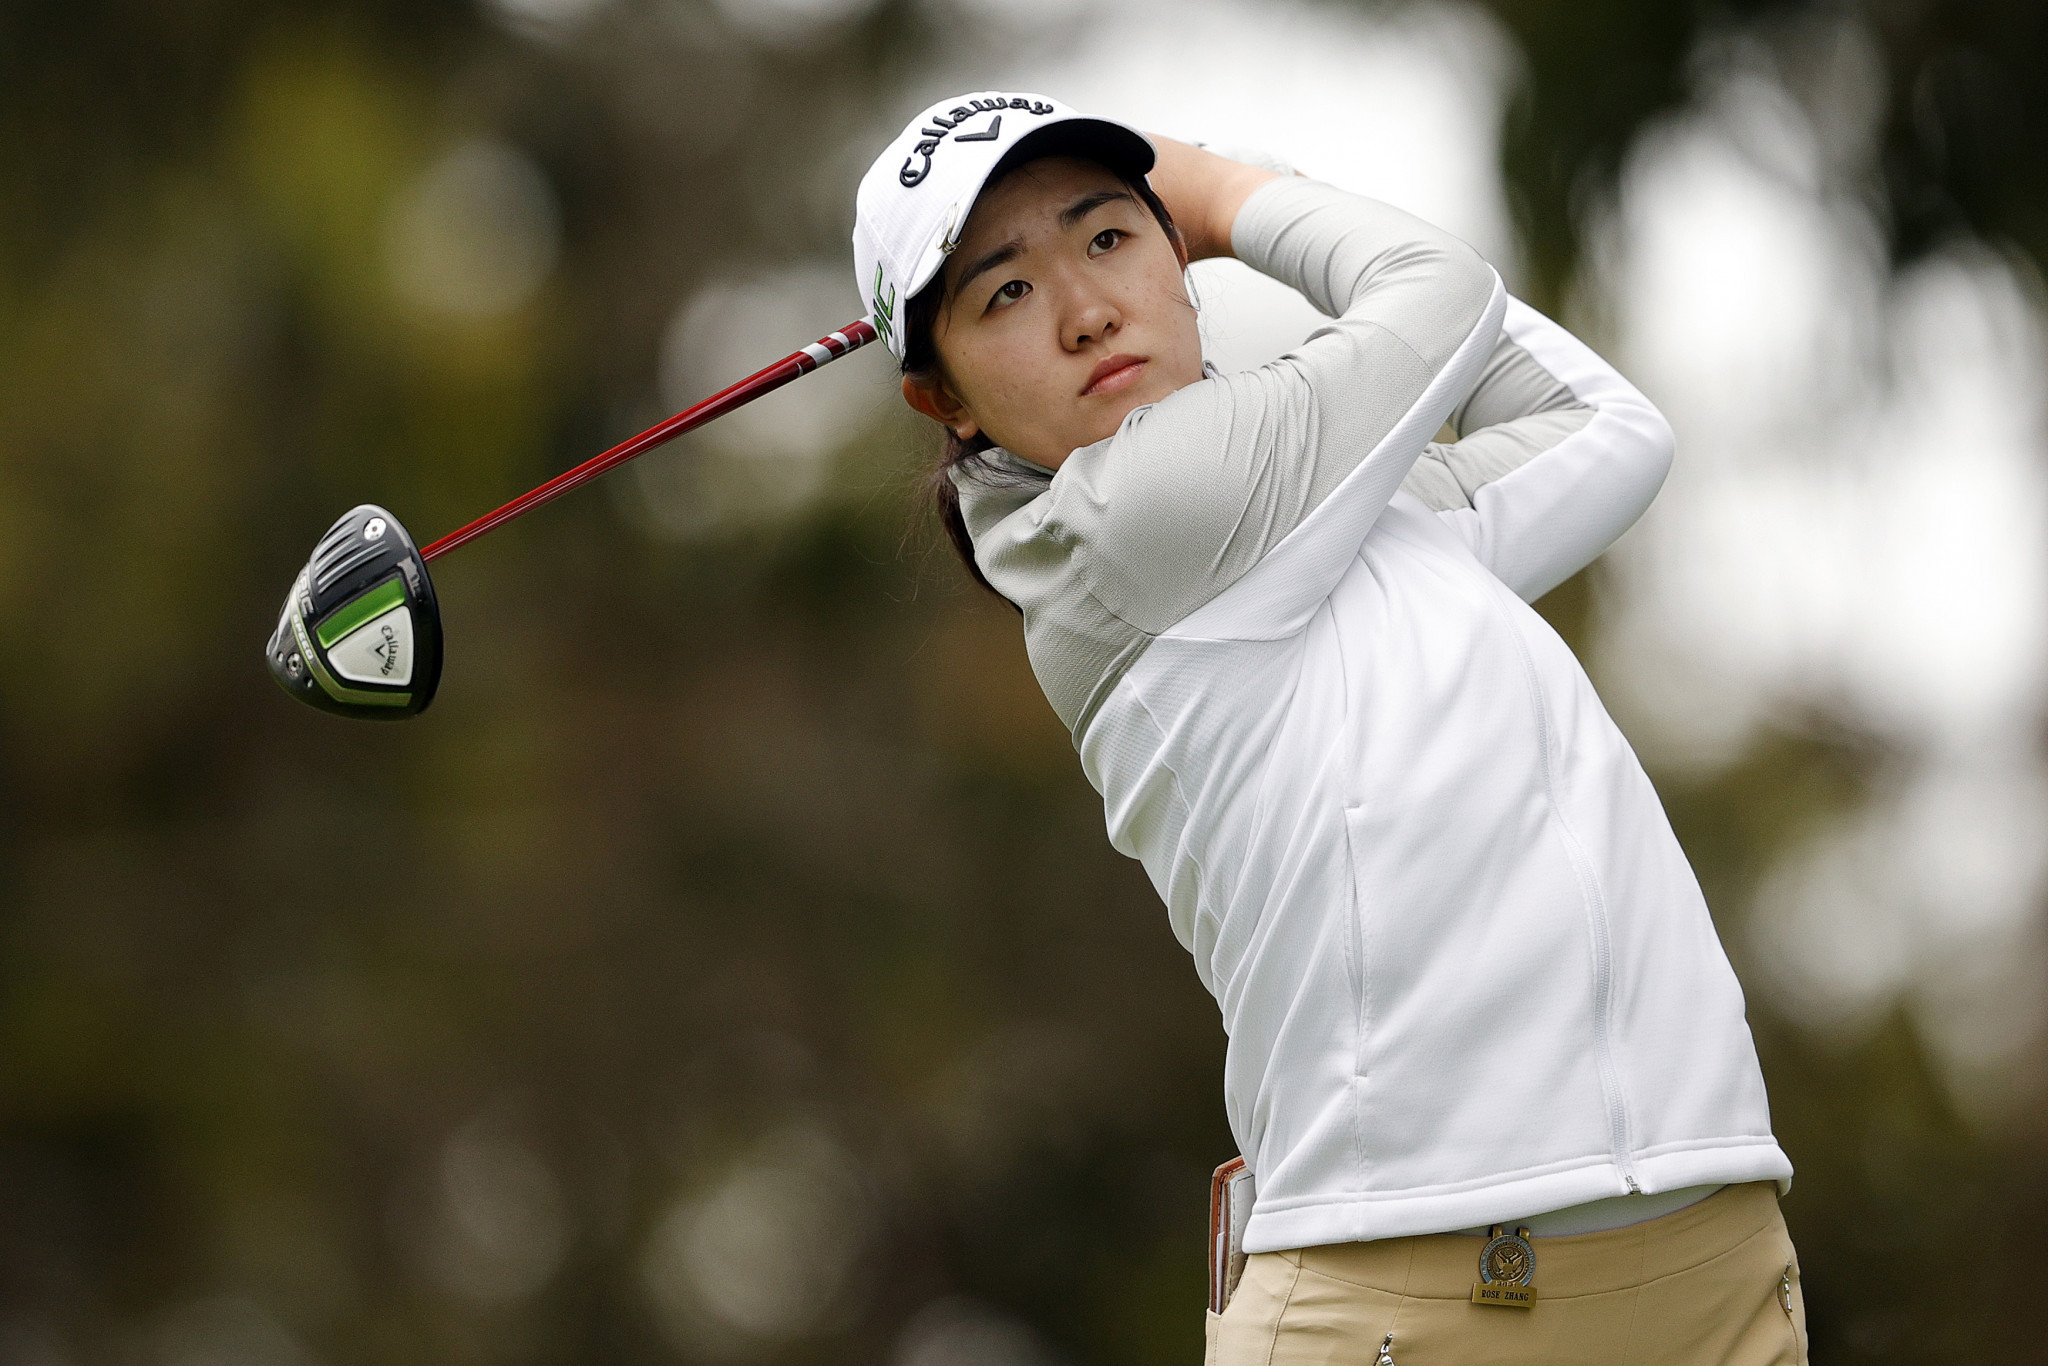 American golfer Zhang becomes first student-athlete to sign Adidas NIL deal